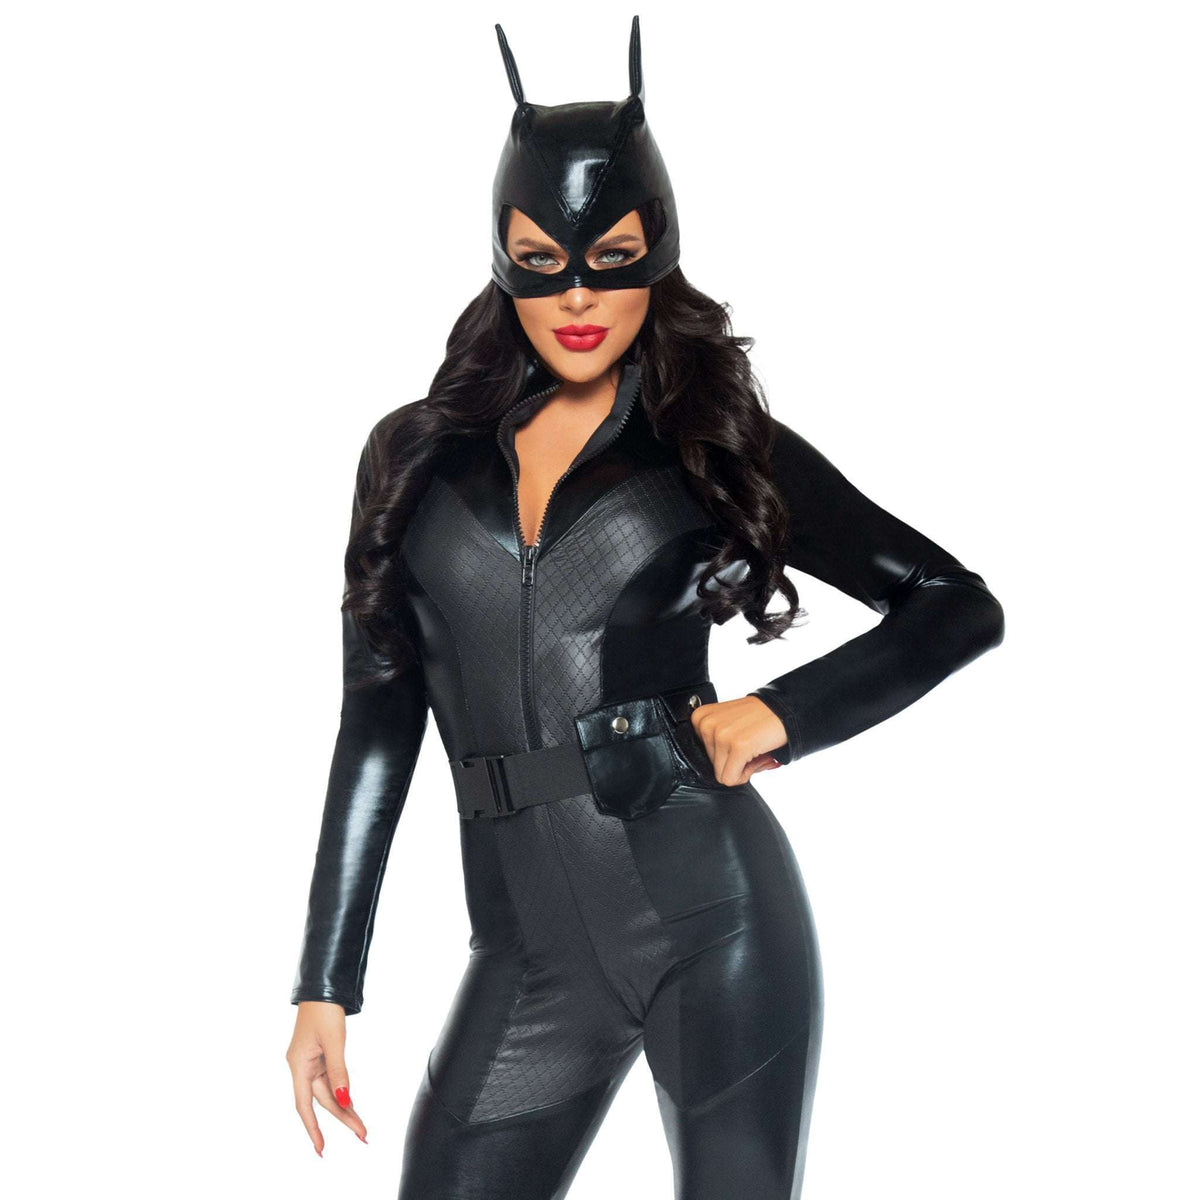 Captivating Crime Fighter Sexy Catsuit Girl Superhero Adult Costume